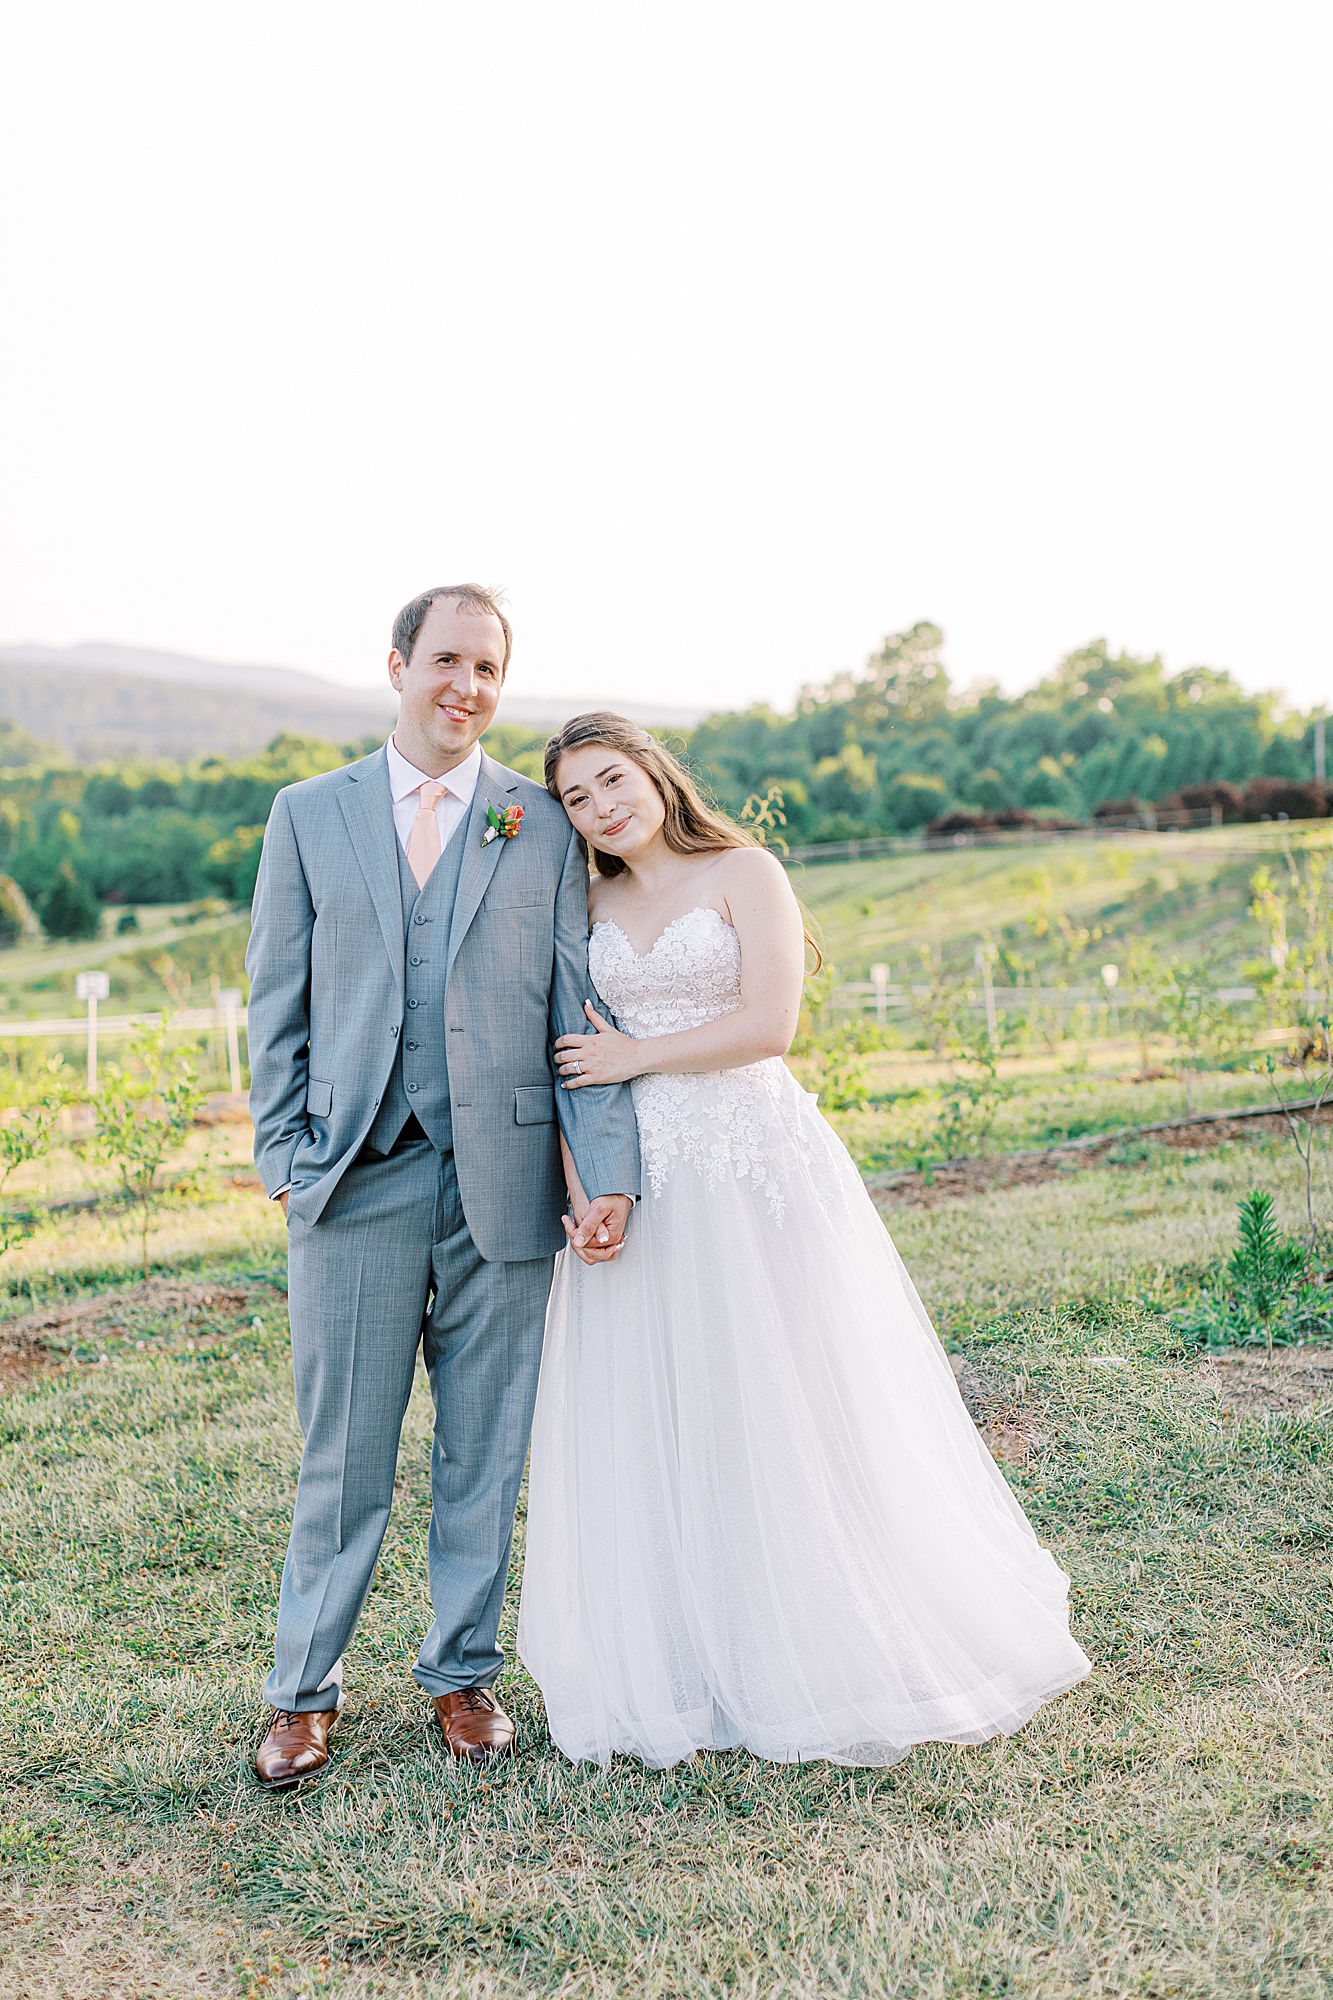 Bride holding onto grooms arm smiling at the camera during sunset portraits taken by Ashley Eagleson Photography.